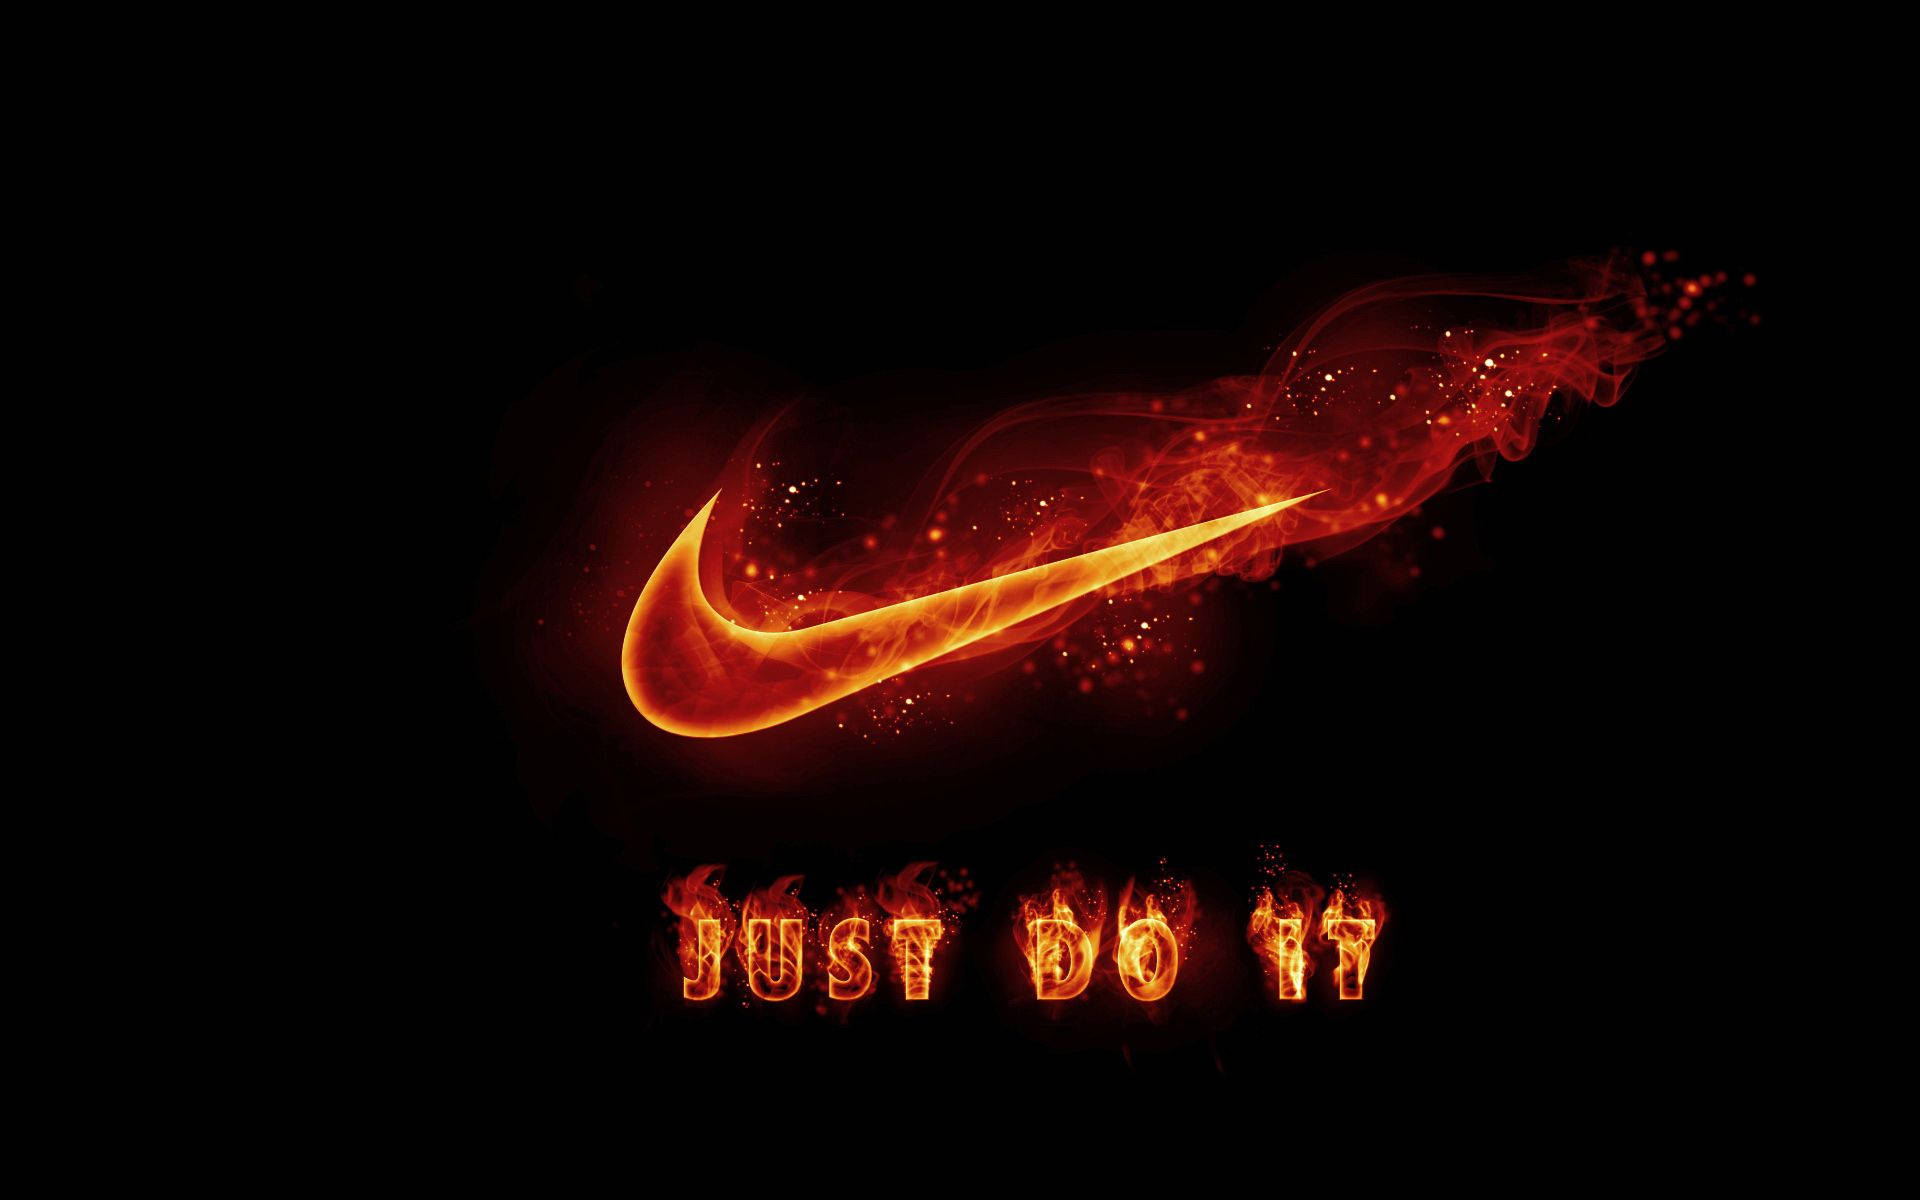 Cool Nike Swoosh With Flames